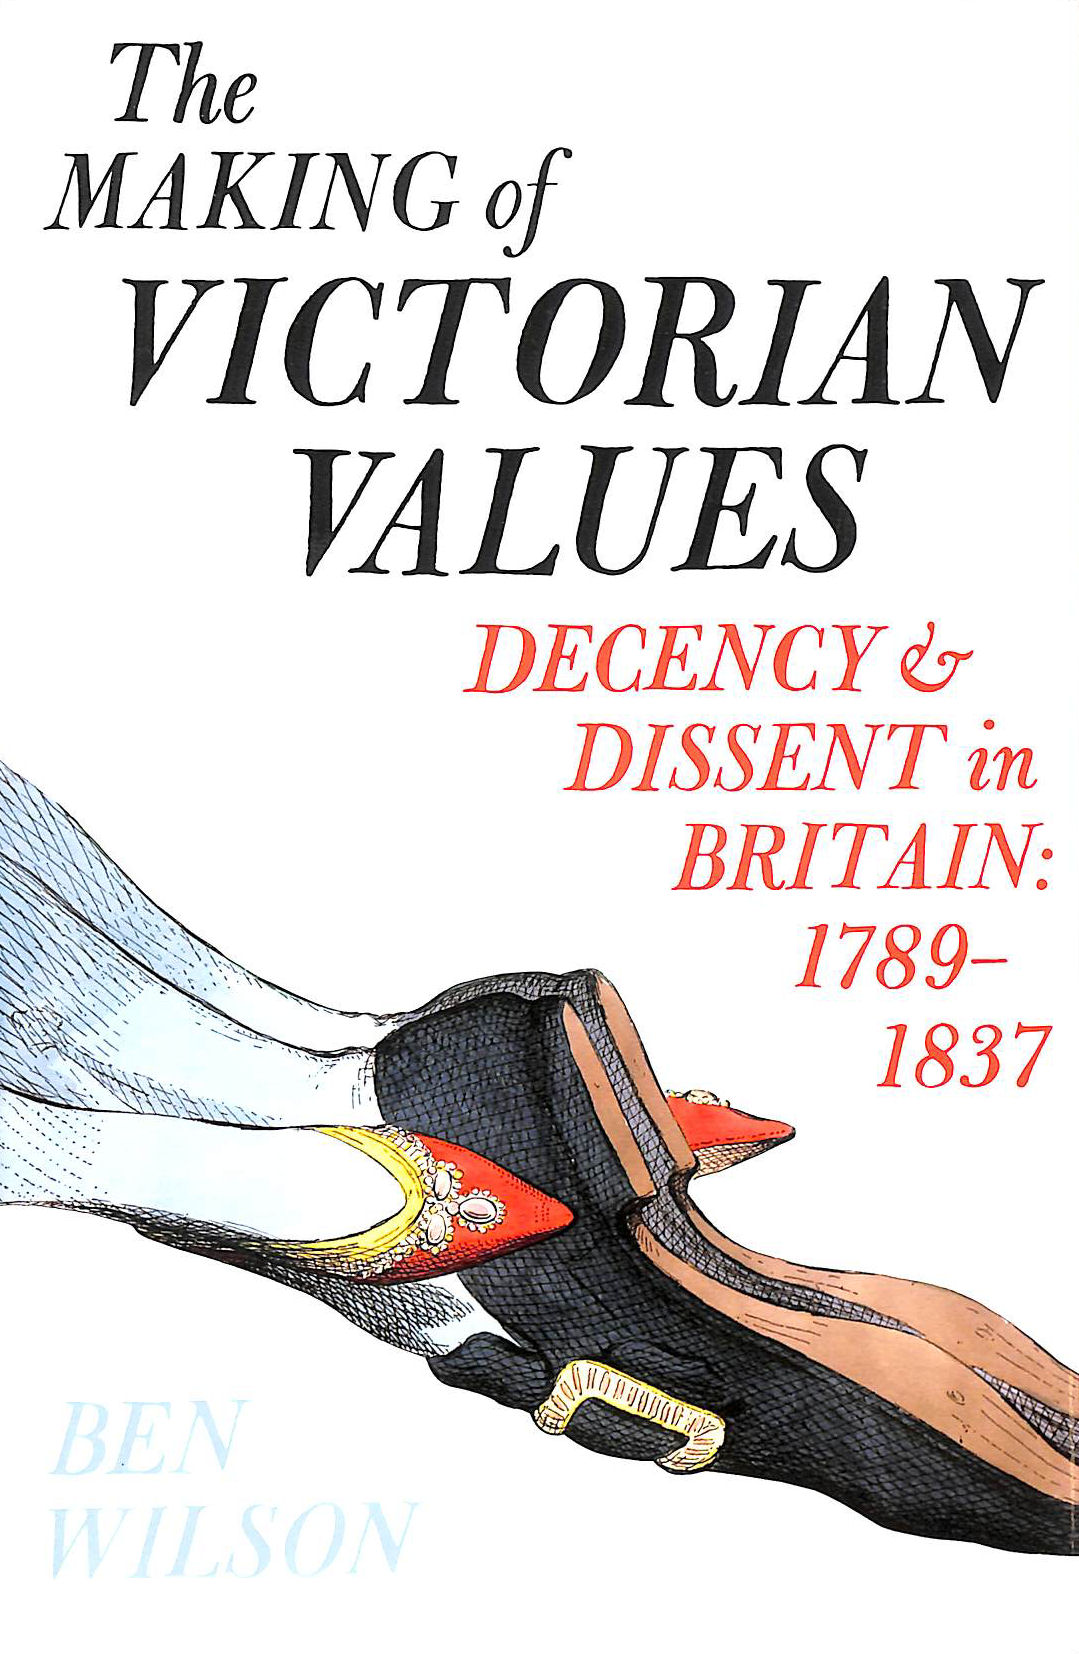 WILSON, BEN - The Making of Victorian Values: Decency and Dissent in Britain: 1789-1837